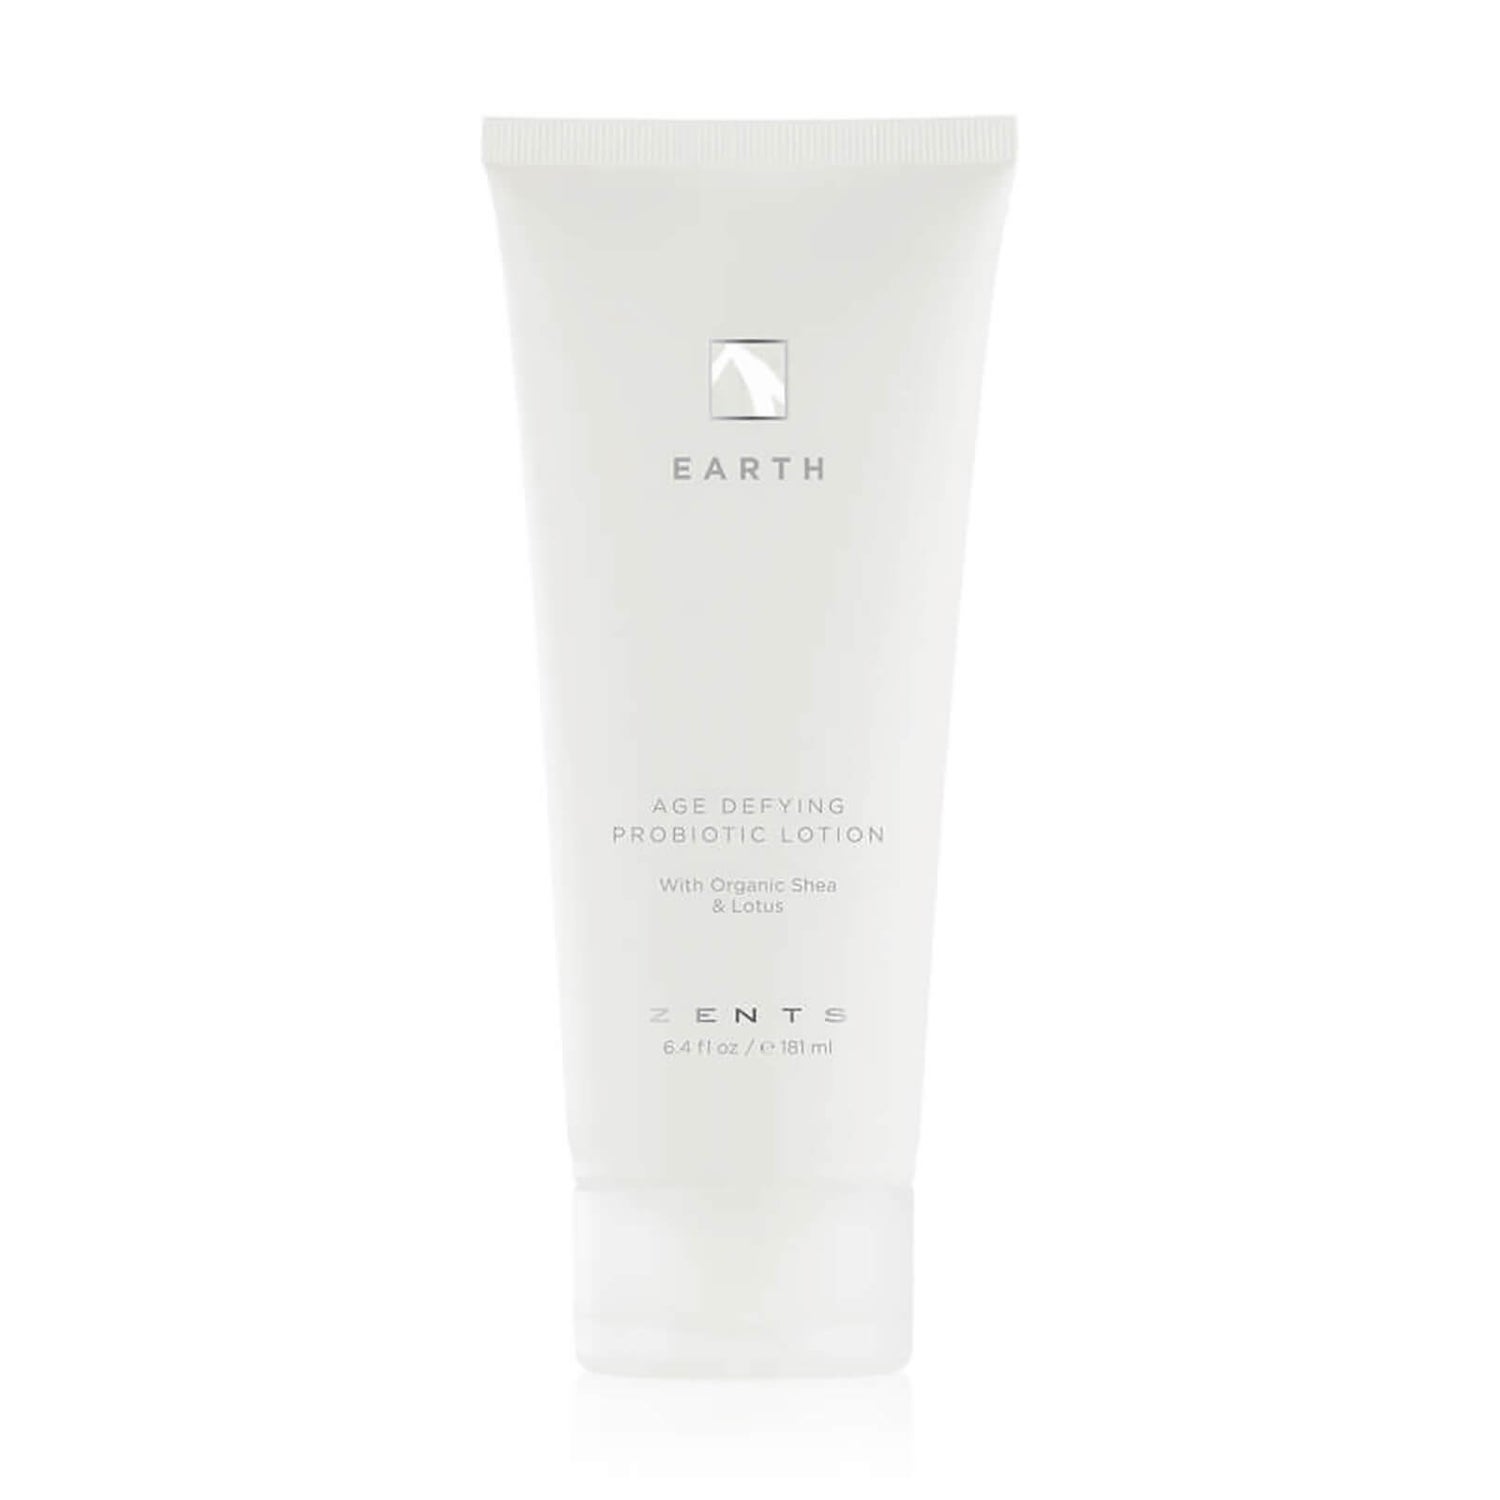 Zents Earth Lotion